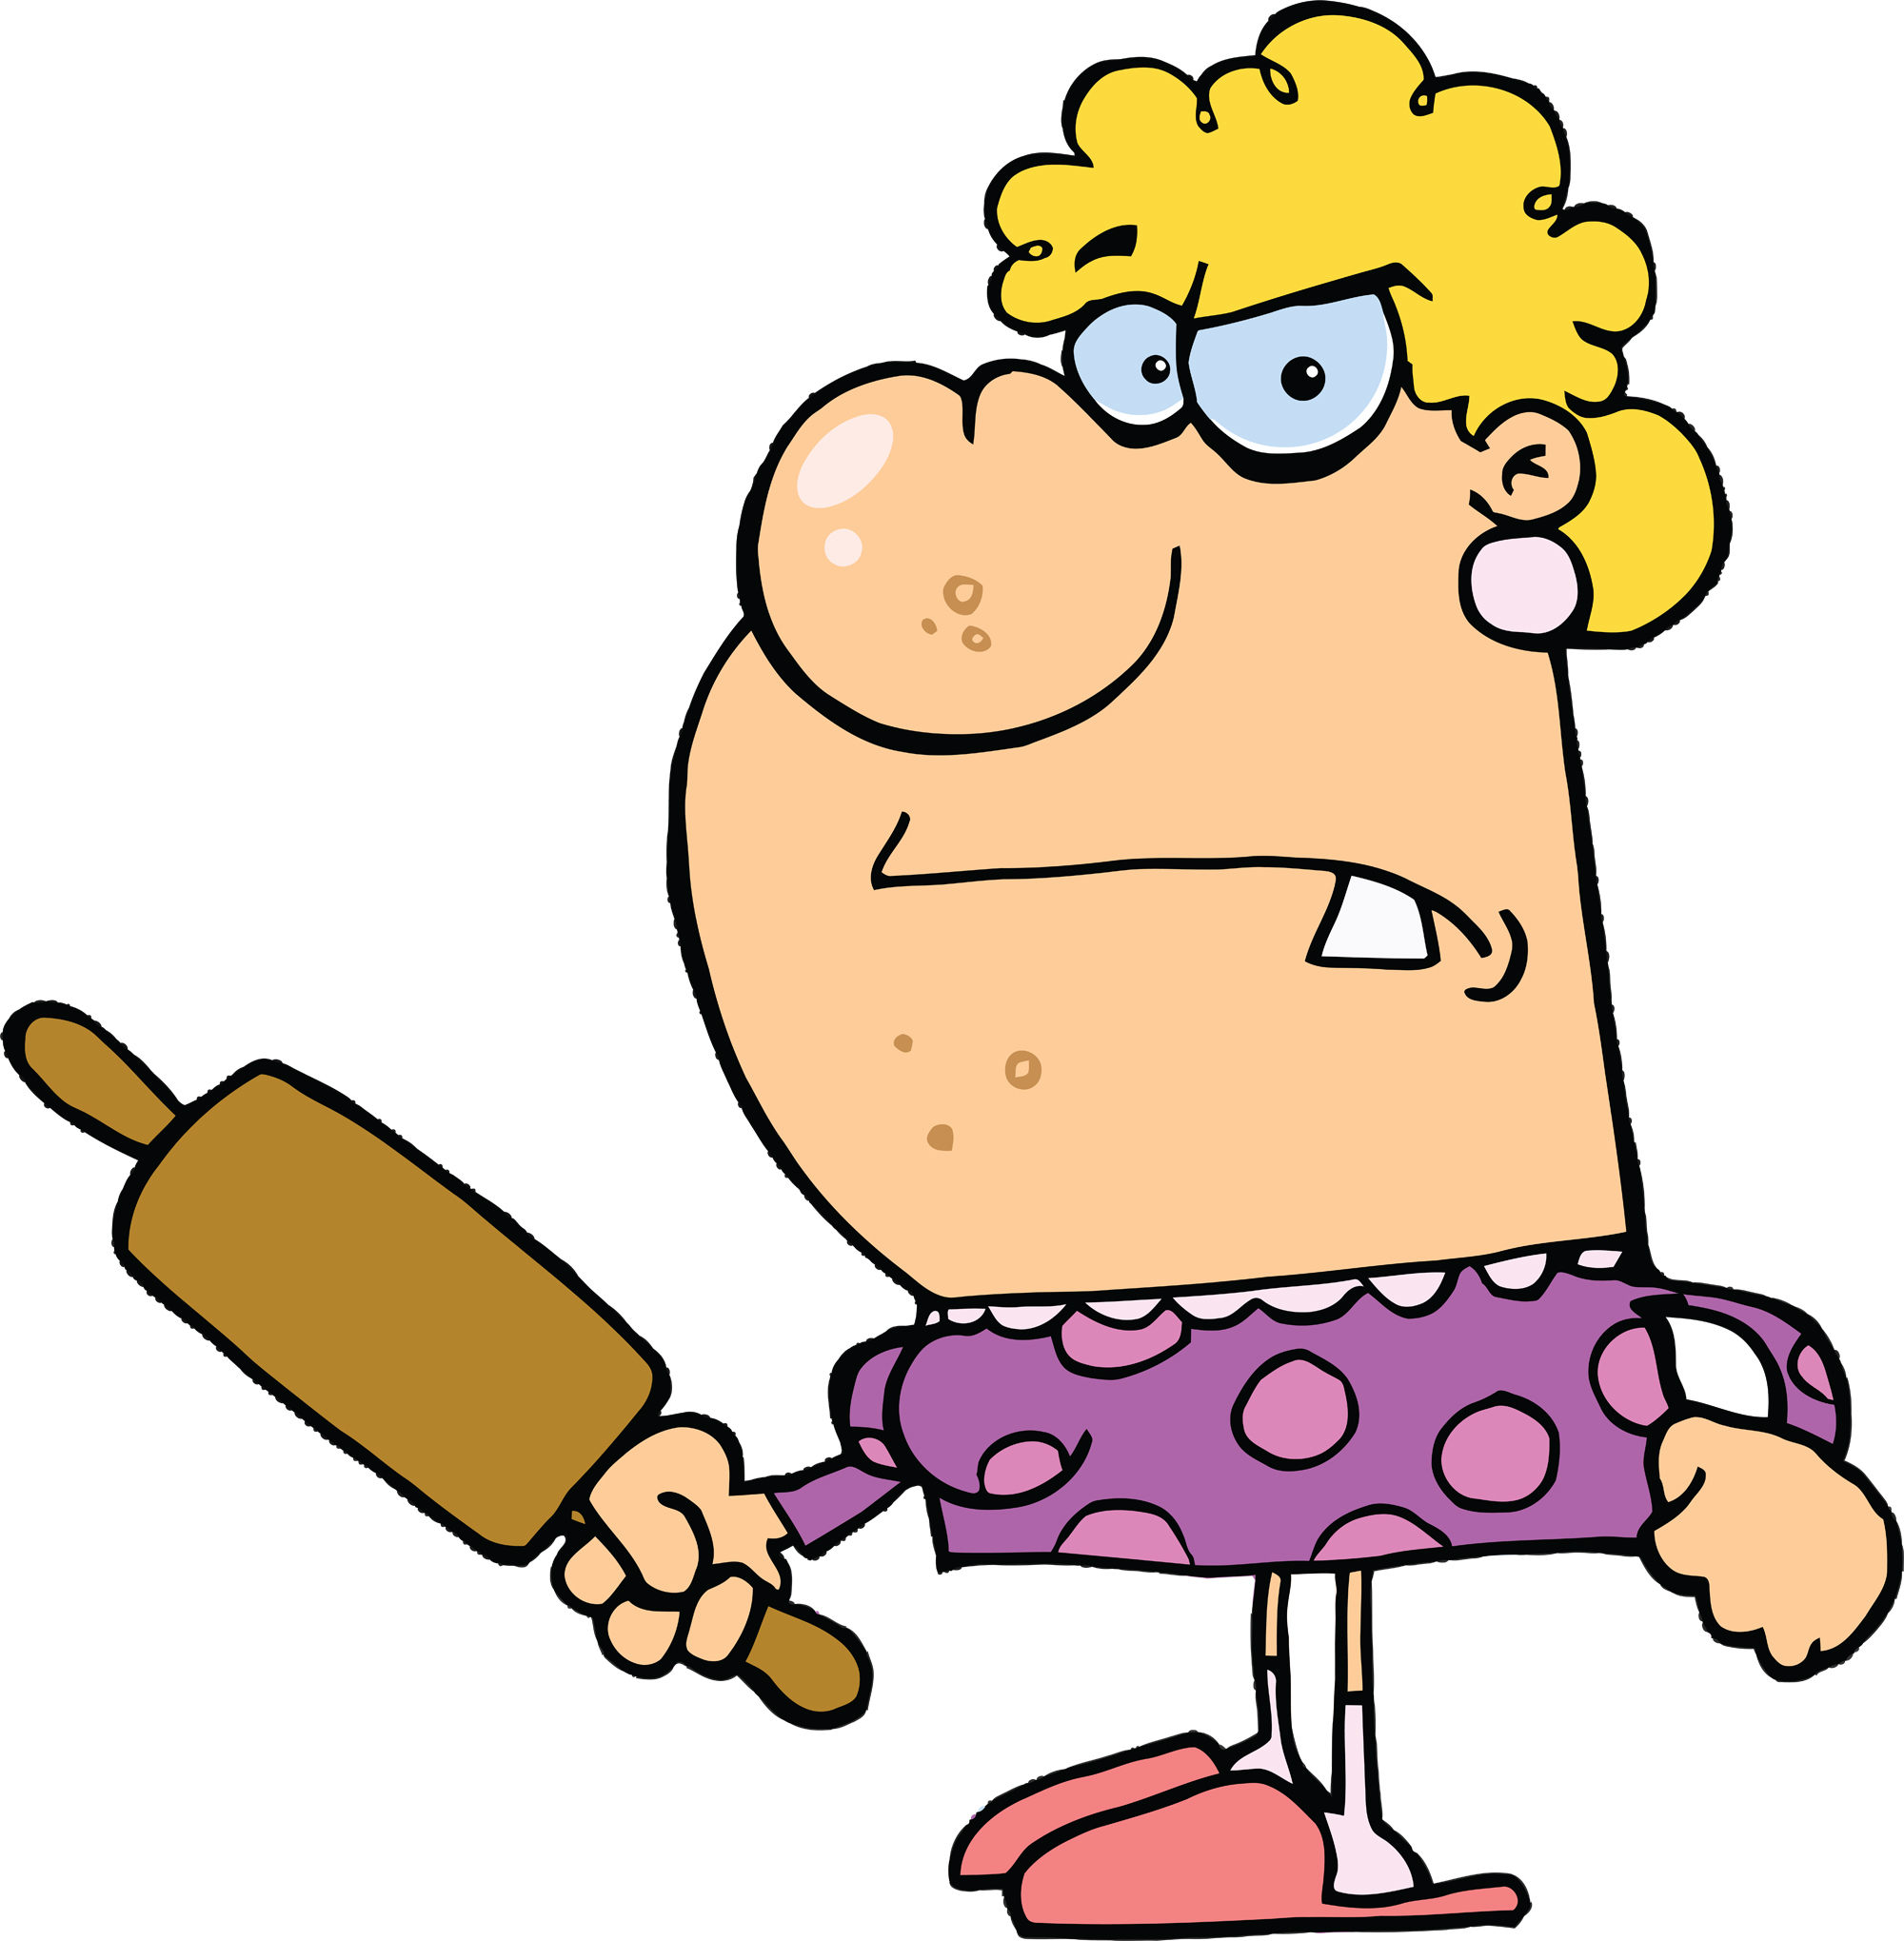 Angry Lady Cartoon Images & Pictures - Becuo